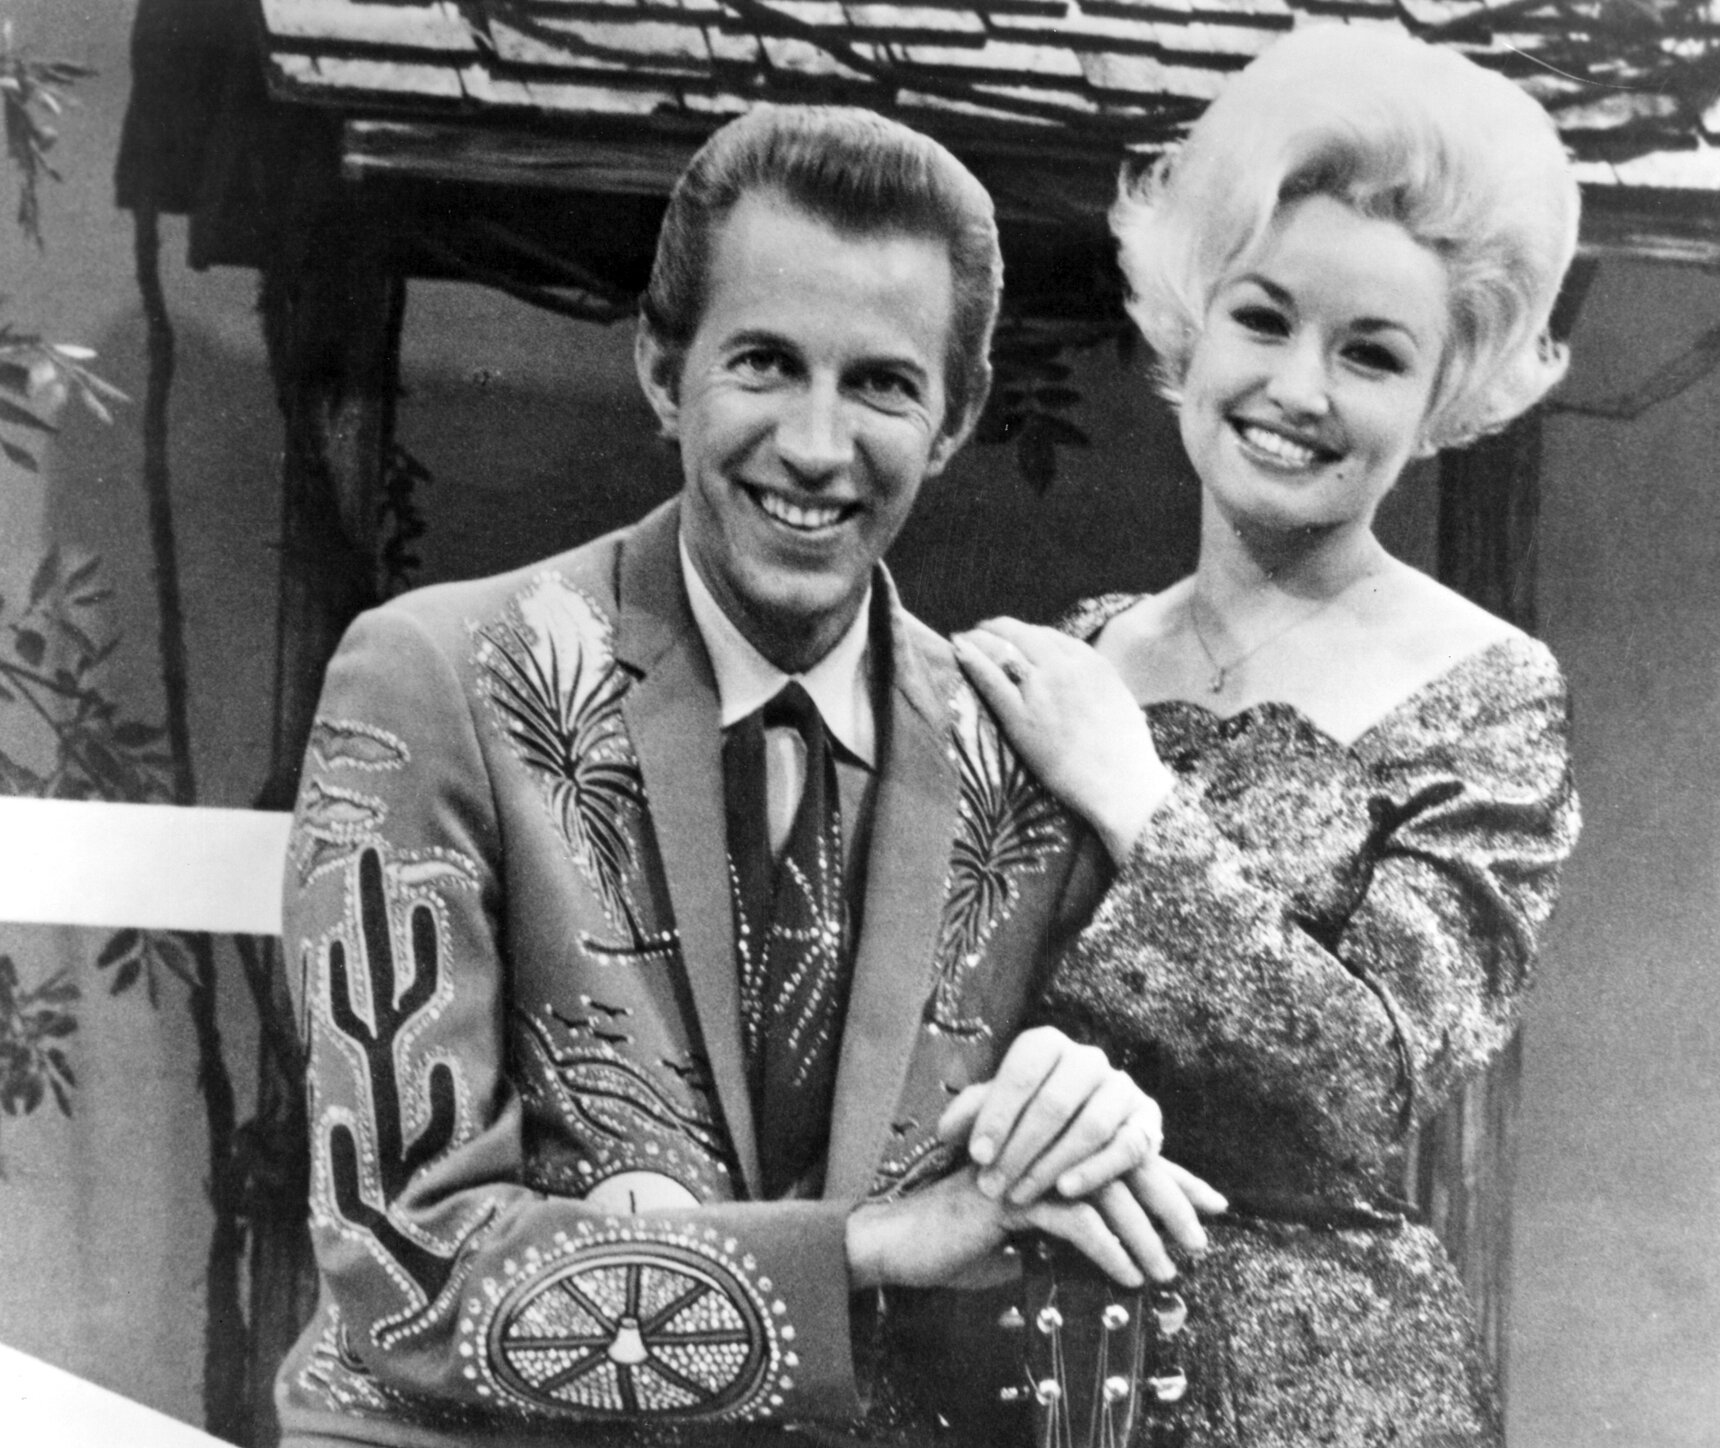 Dolly Parton with her collaborator Porter Wagoner on the set of his TV show in 1967.